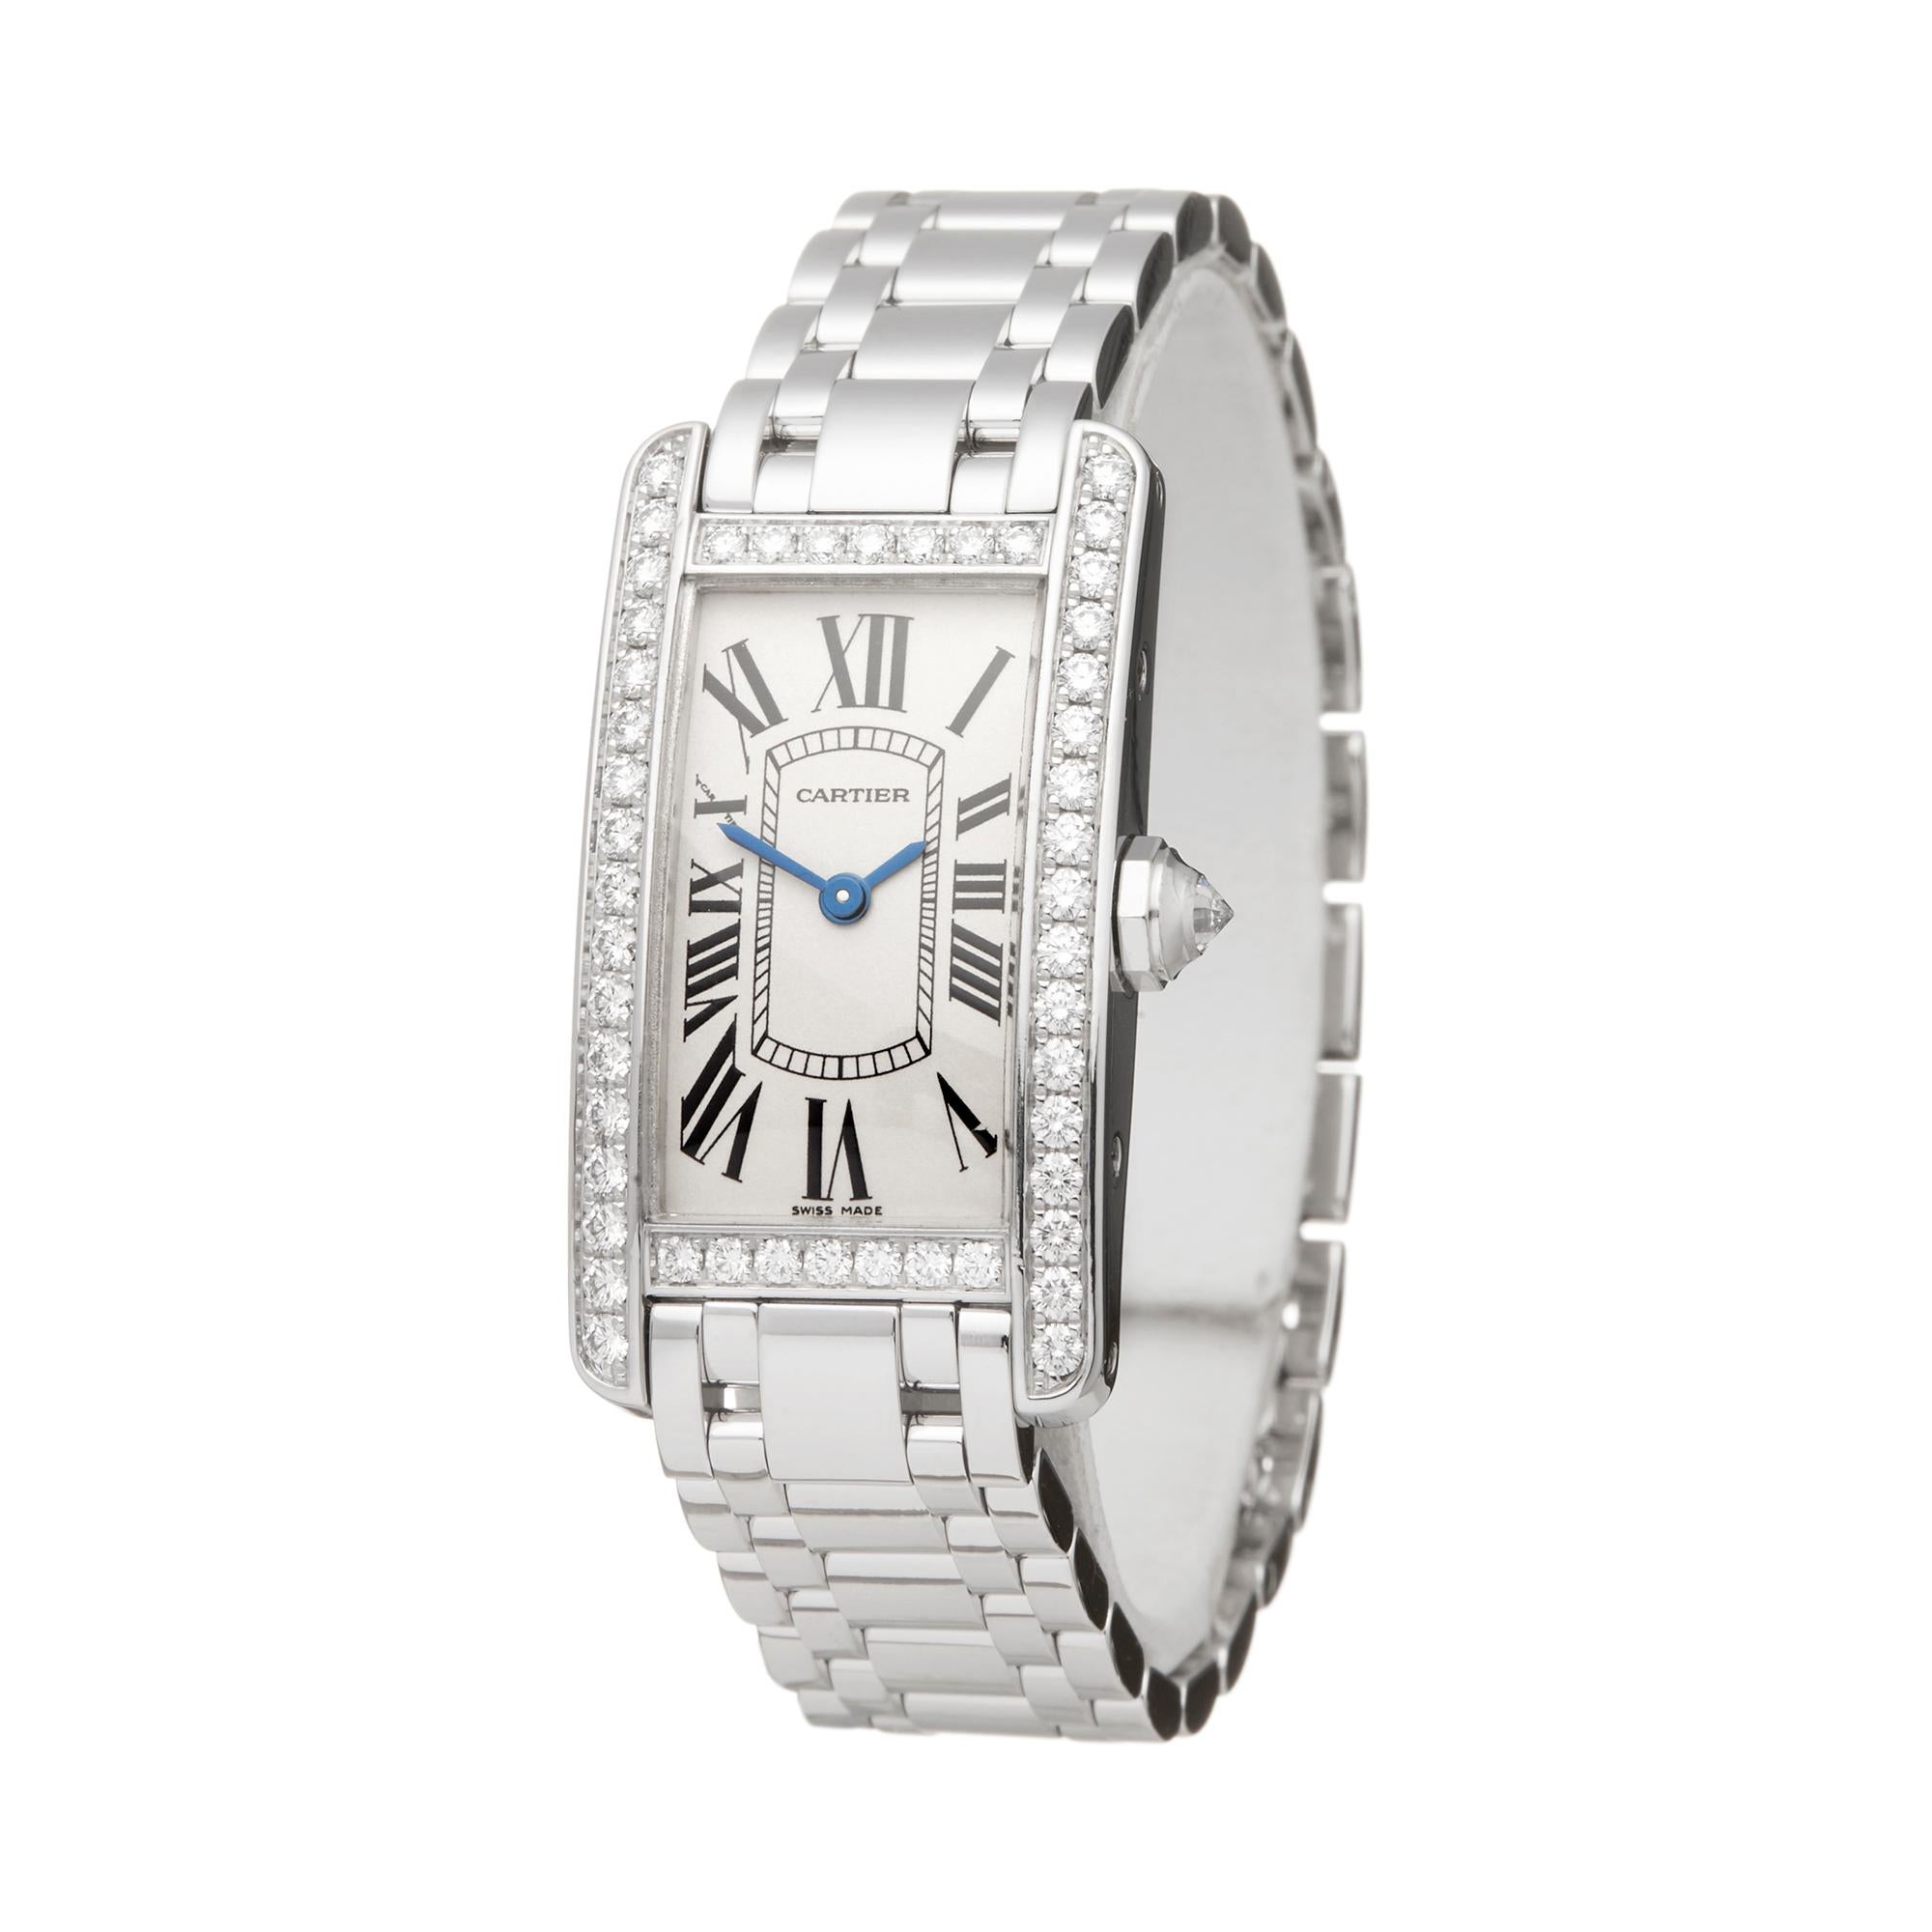 Ref: W5871
Manufacturer: Cartier
Model: 
Model Ref: 2489
Age: Circa 2010's
Gender: Ladies
Complete With: Presentation Box & Service Papers dated 21st February 2019
Dial: White Roman 
Glass: Sapphire Crystal
Movement: Quartz
Water Resistance: To